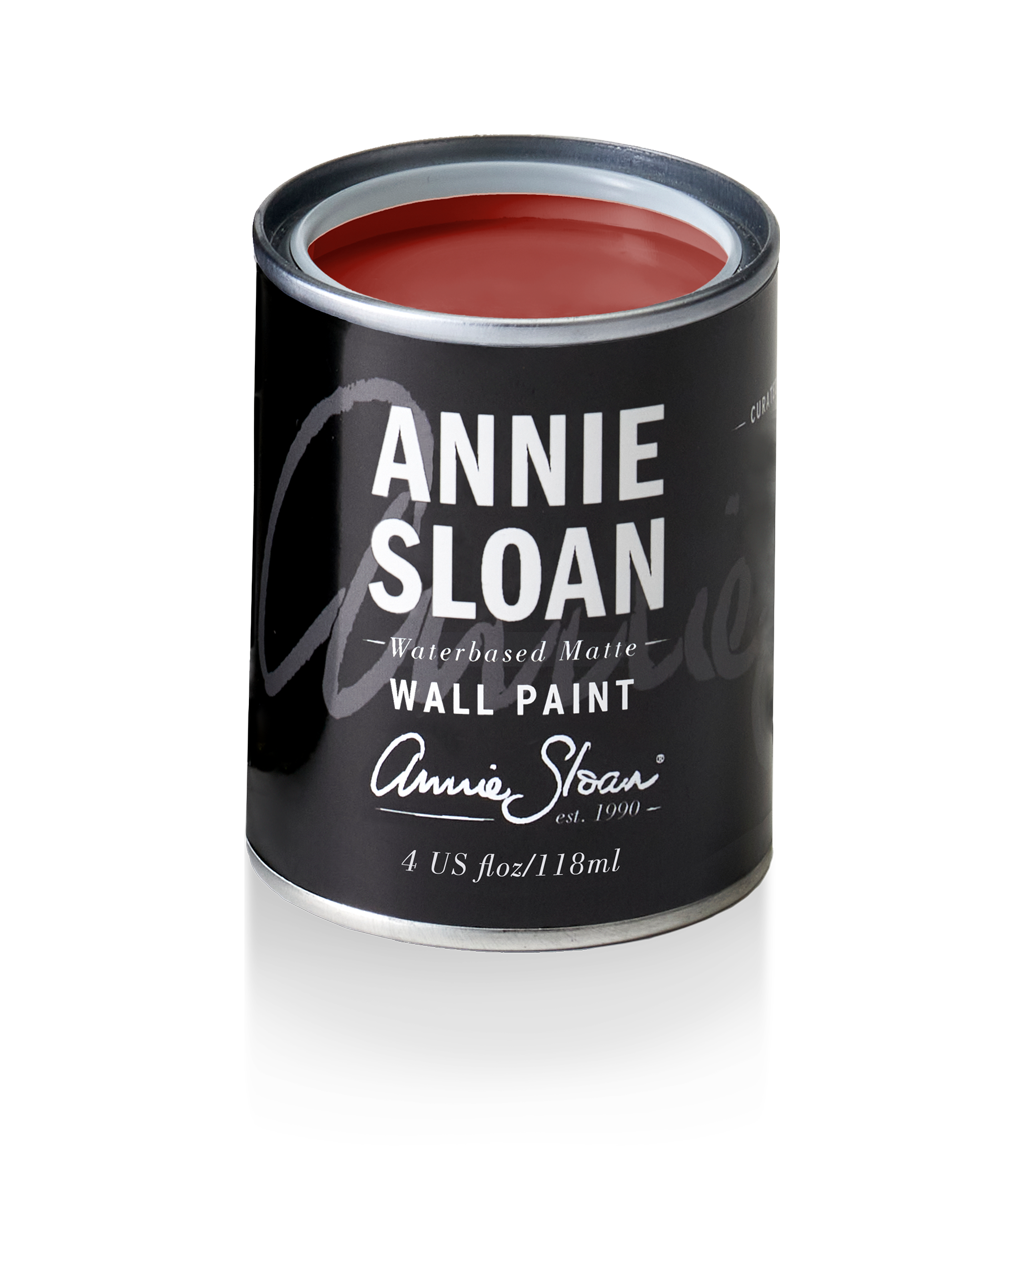 Annie Sloan Wall Paint Tin Primer Red